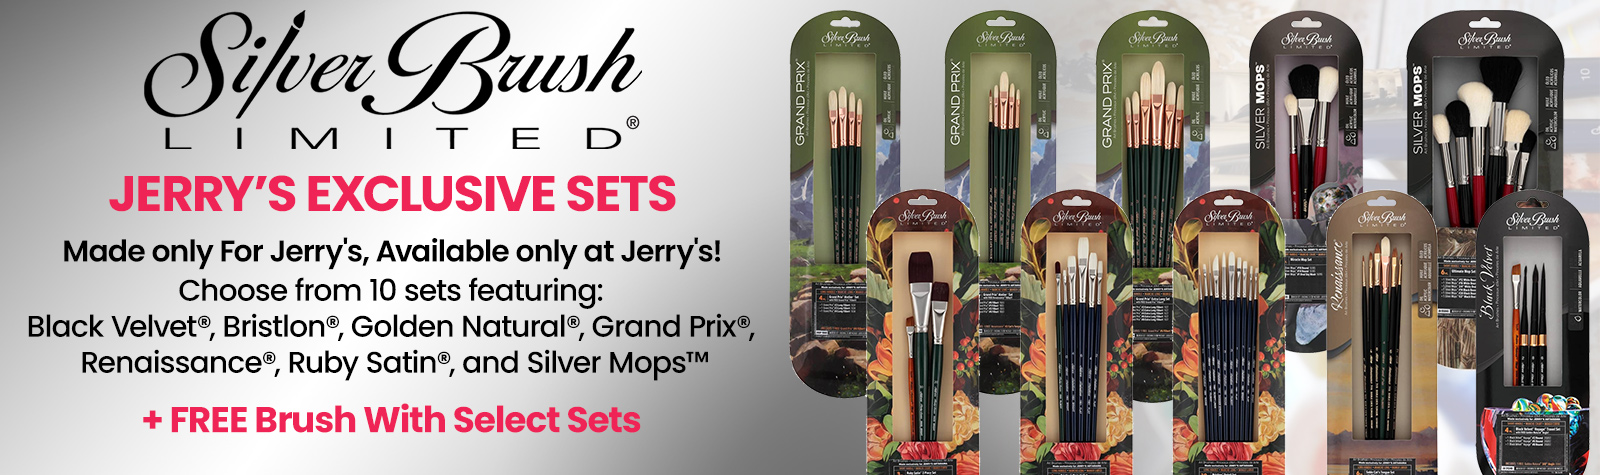 Silver Brush Jerry's Exclusive Sets